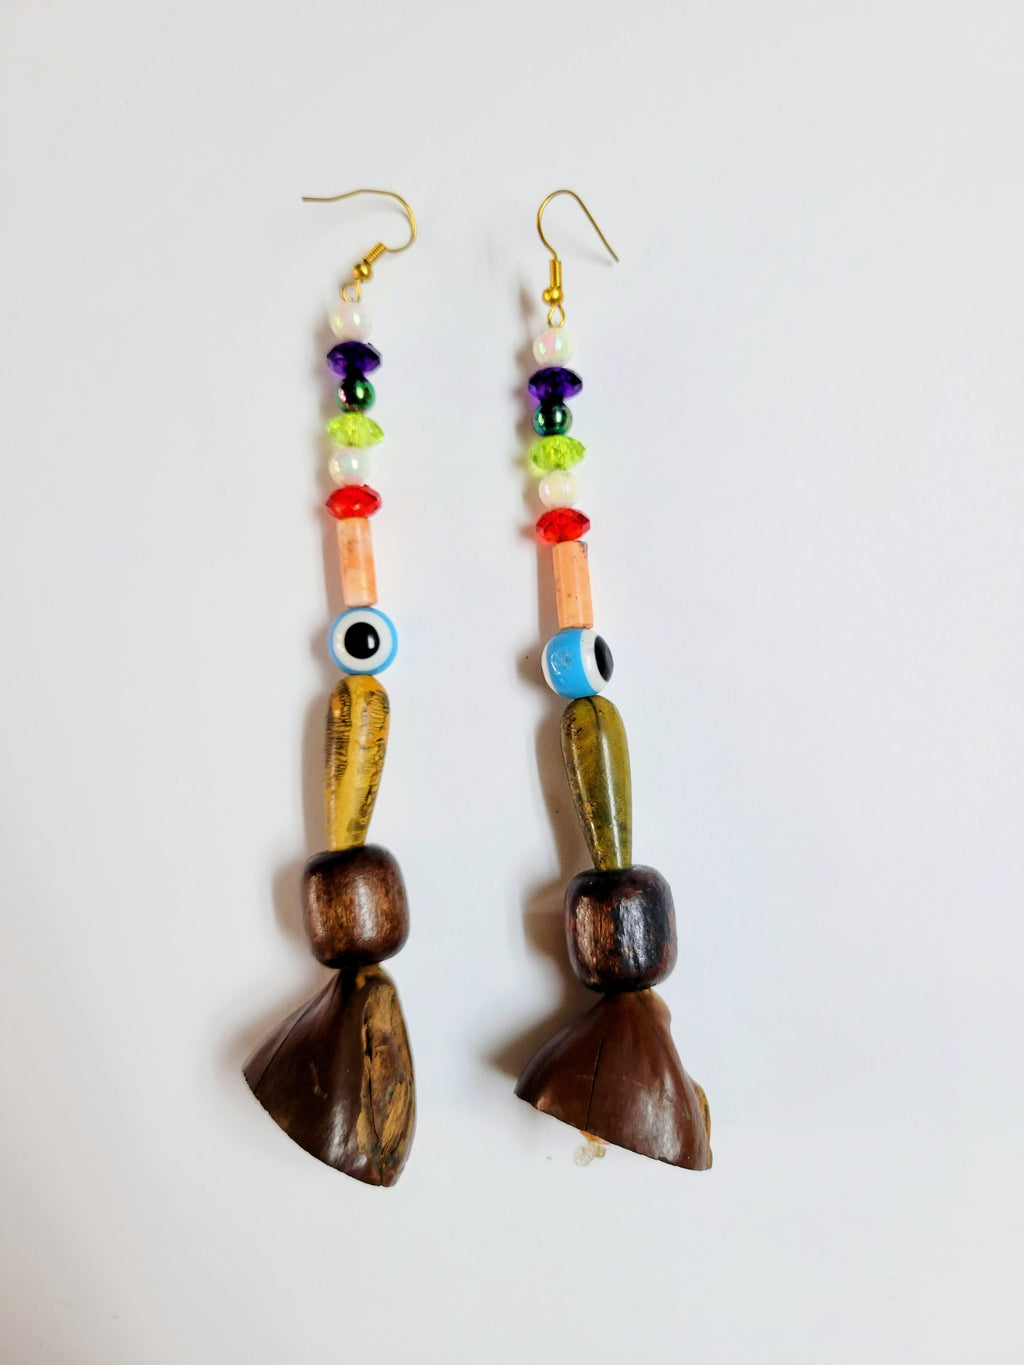 Antobam 3-inch, 3-layered African bead and wood hook earrings-DPJGE41